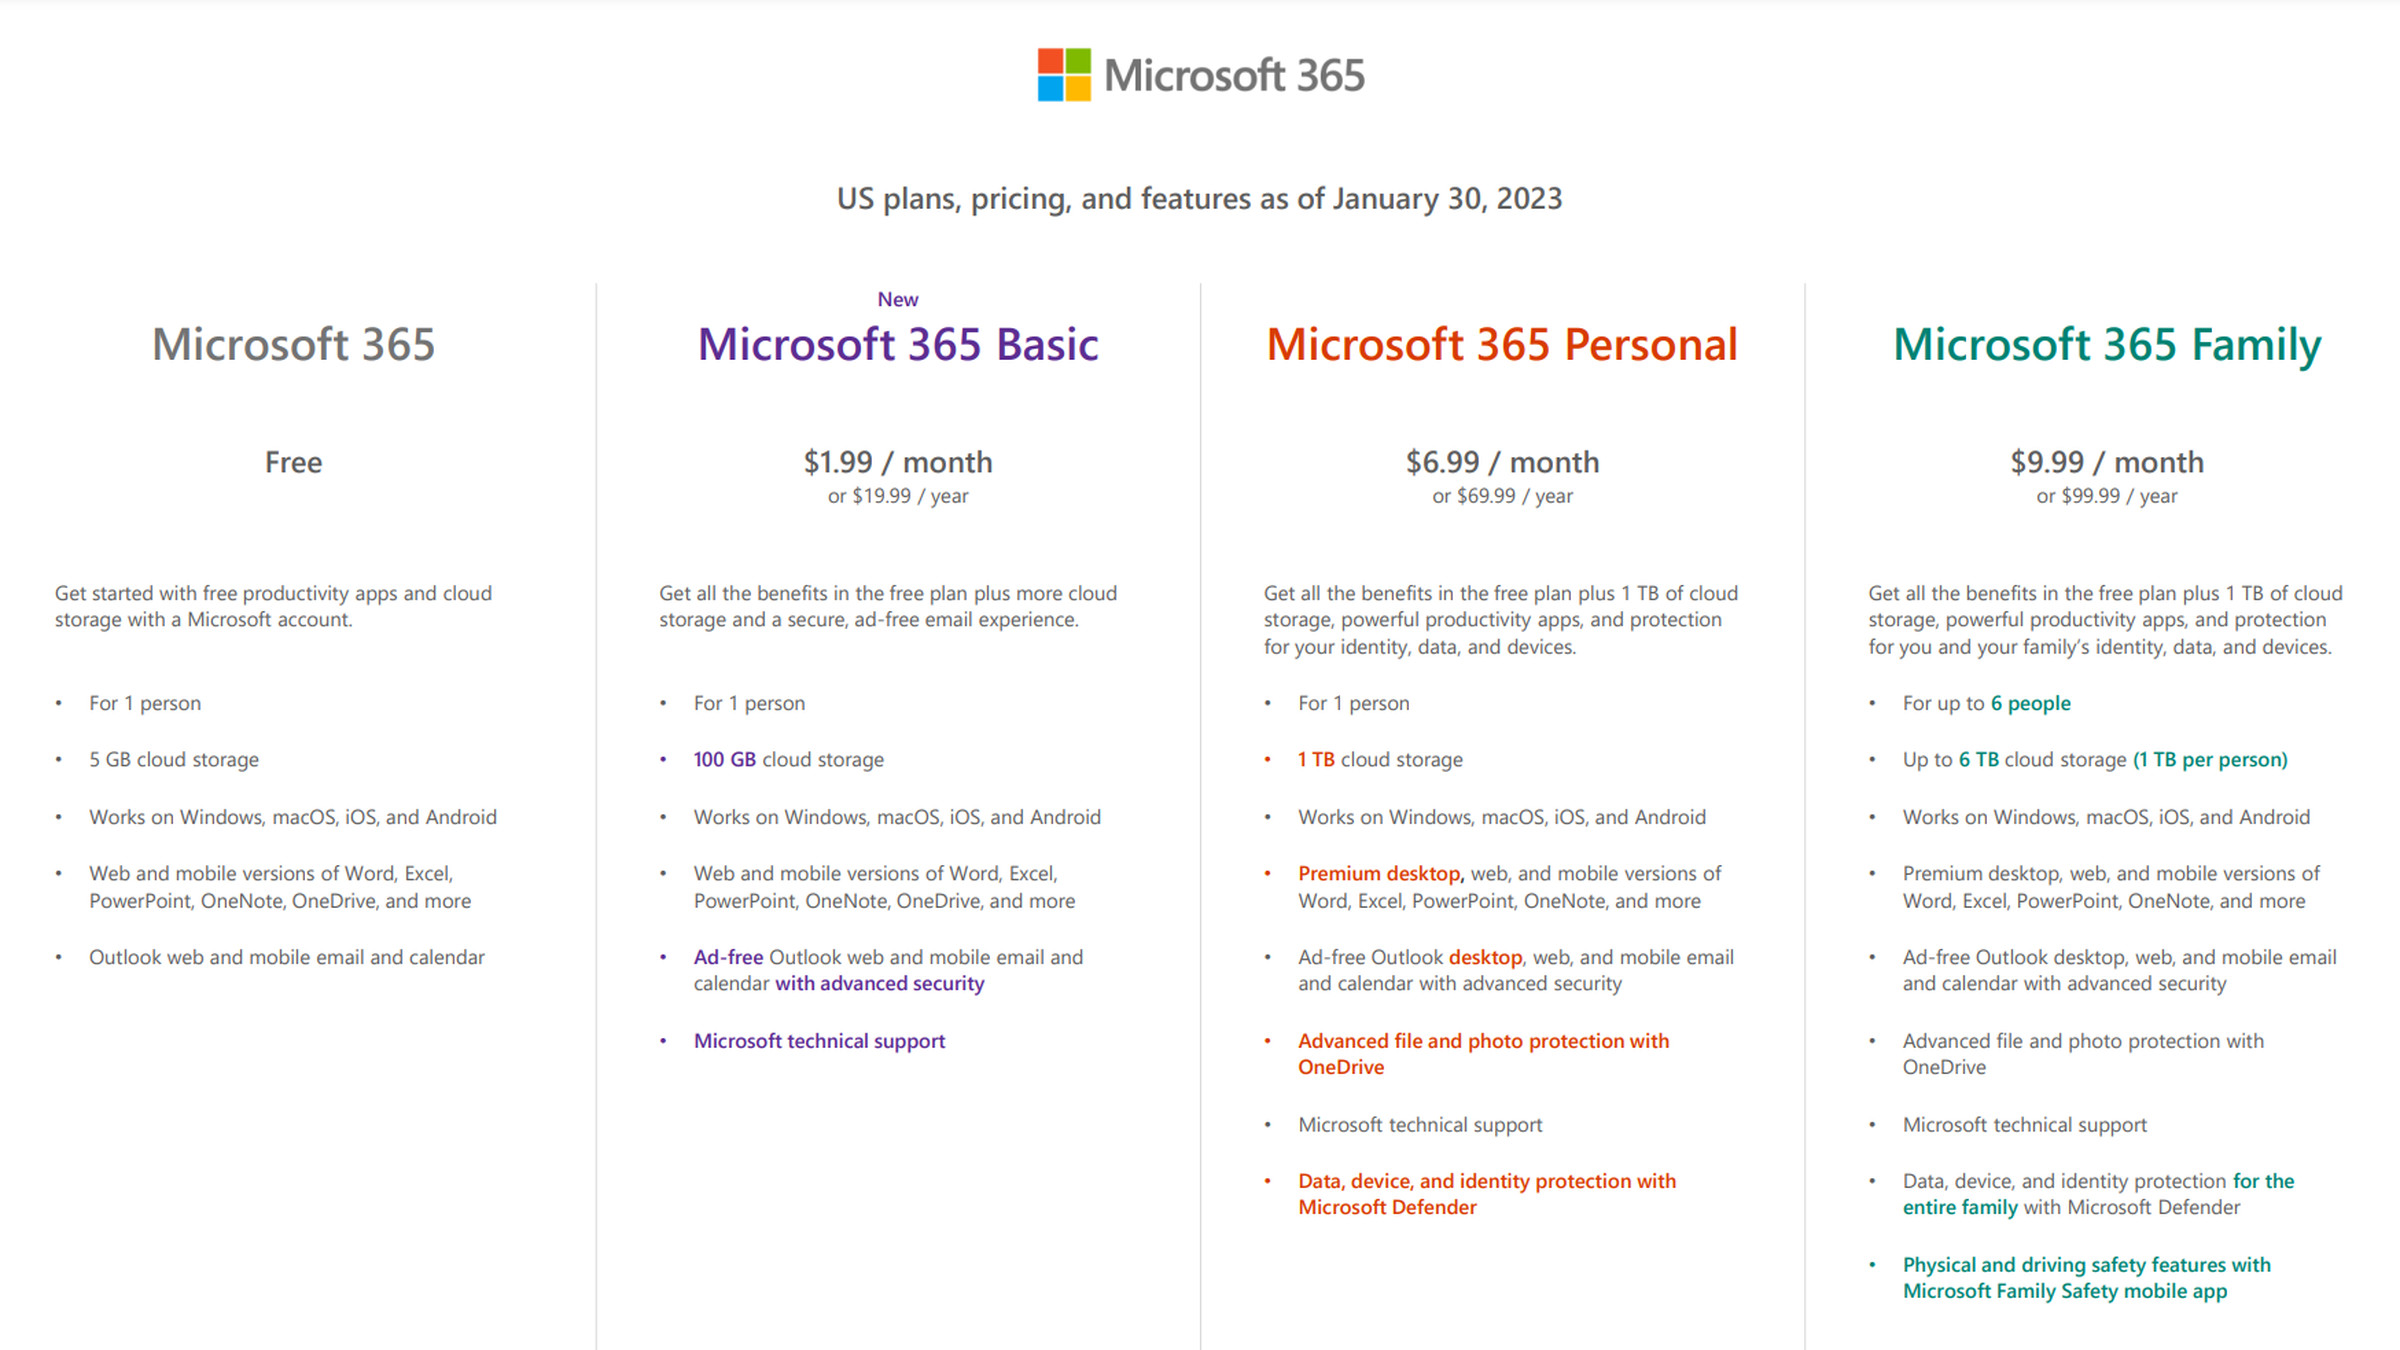 Microsoft 365 plans and pricing for the US.